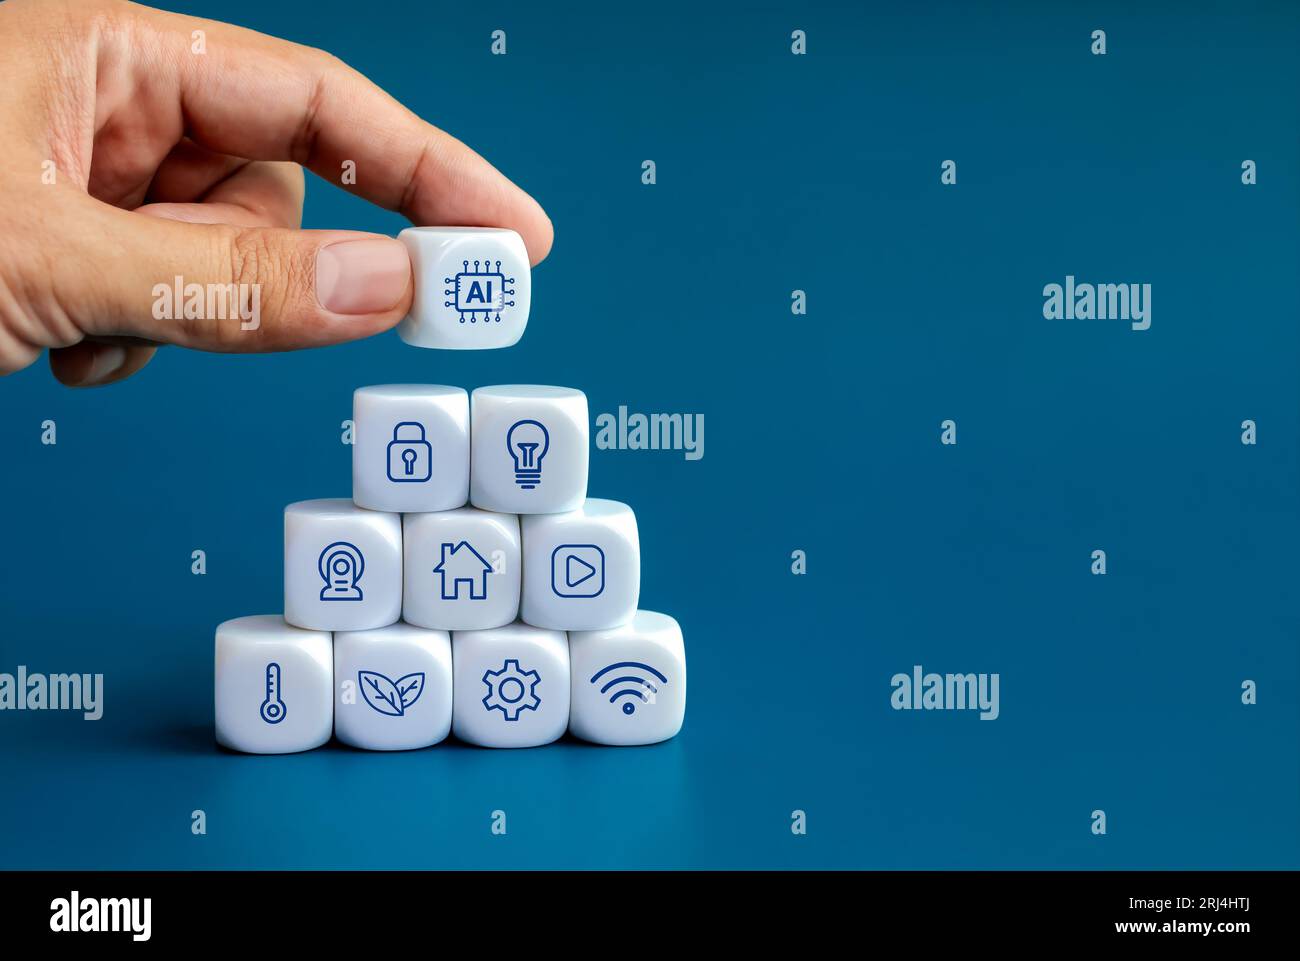 AI technology and smart home technology concepts. Artificial intelligence icon in human hand put on top of triangle shape blocks stack with home digit Stock Photo